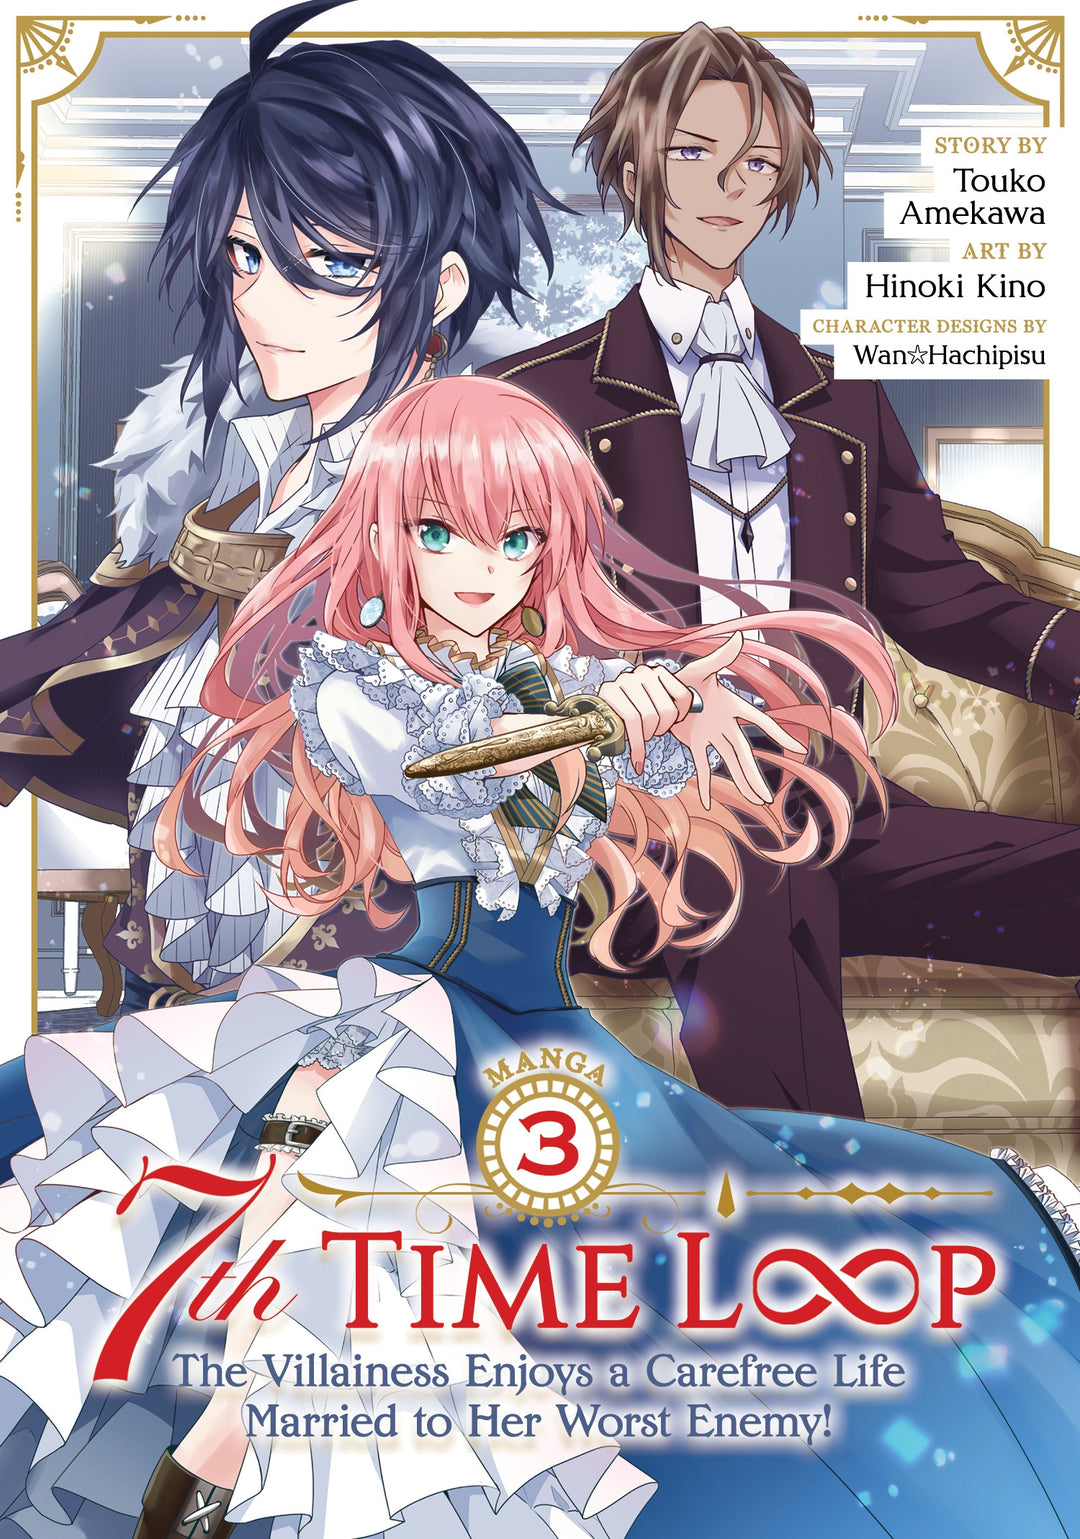 7th Time Loop The Villainess Enjoys a Carefree Life Married to Her Worst Enemy! (Manga) Vol. 03